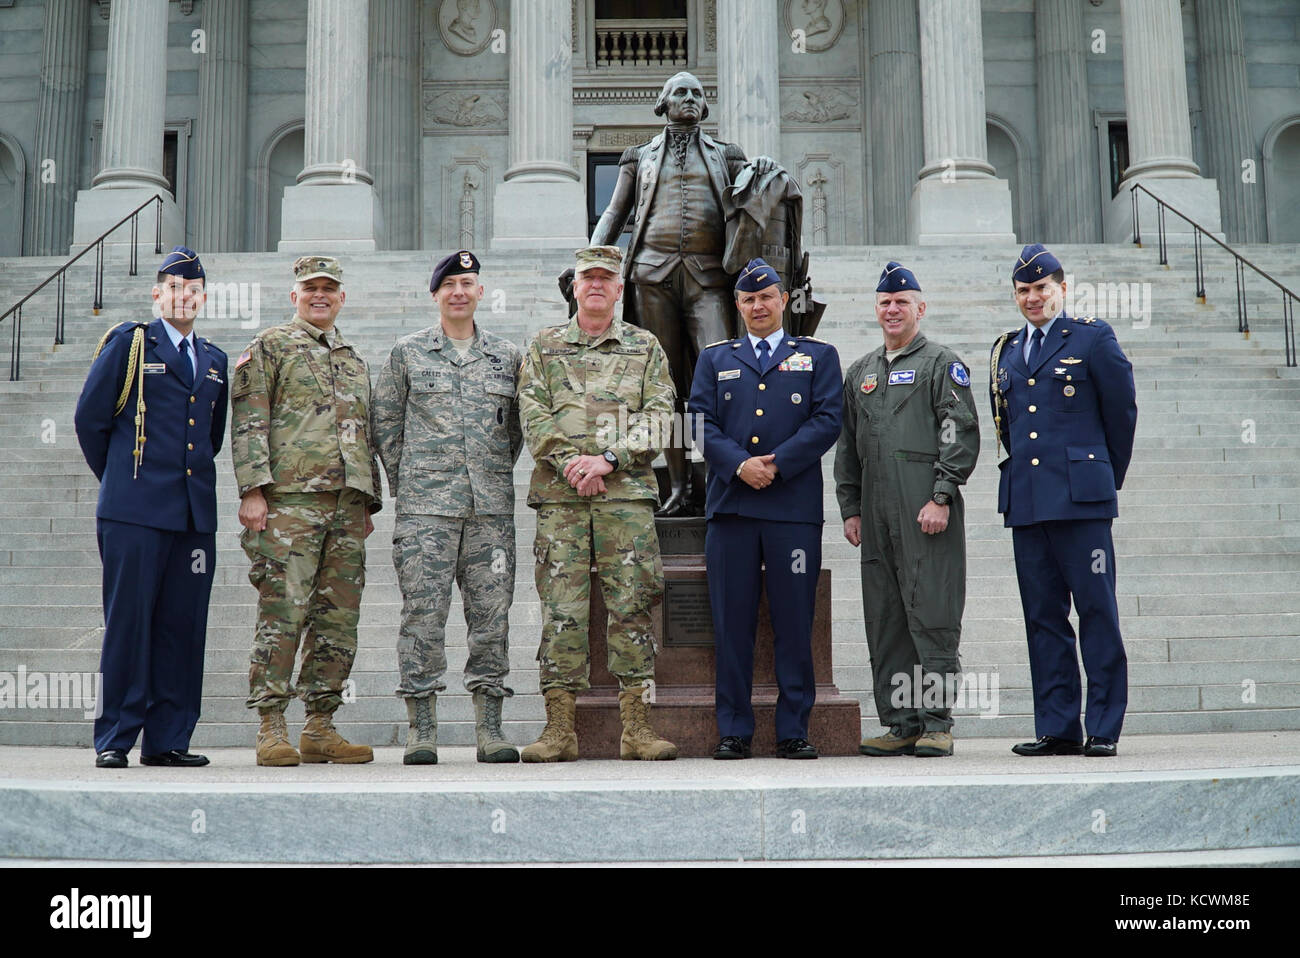 Colombian Air Force Gen. Carlos Eduardo Bueno Vargas, Colombian Air Force commander, stands in front of the State House during a state partnership engagement, Columbia, South Carolina, Feb. 21, 2017. Also pictured is Colombian Air Force Maj. Juan Camilo Nunez, U.S. Army Lt. Col. David King, U.S. Air Force Col. Chris Callis, U.S. Army Brig. Gen. Timothy J. Sheriff, deputy commanding general of the 263rd Army Air and Missile Defense Command, U.S. Air Force Brig. Gen. R. Scott Lambe, South Carolina Air National Guard chief of staff, and Colombian Air Force Col. Juan Carlos Rueda Cartagena. (U.S.  Stock Photo